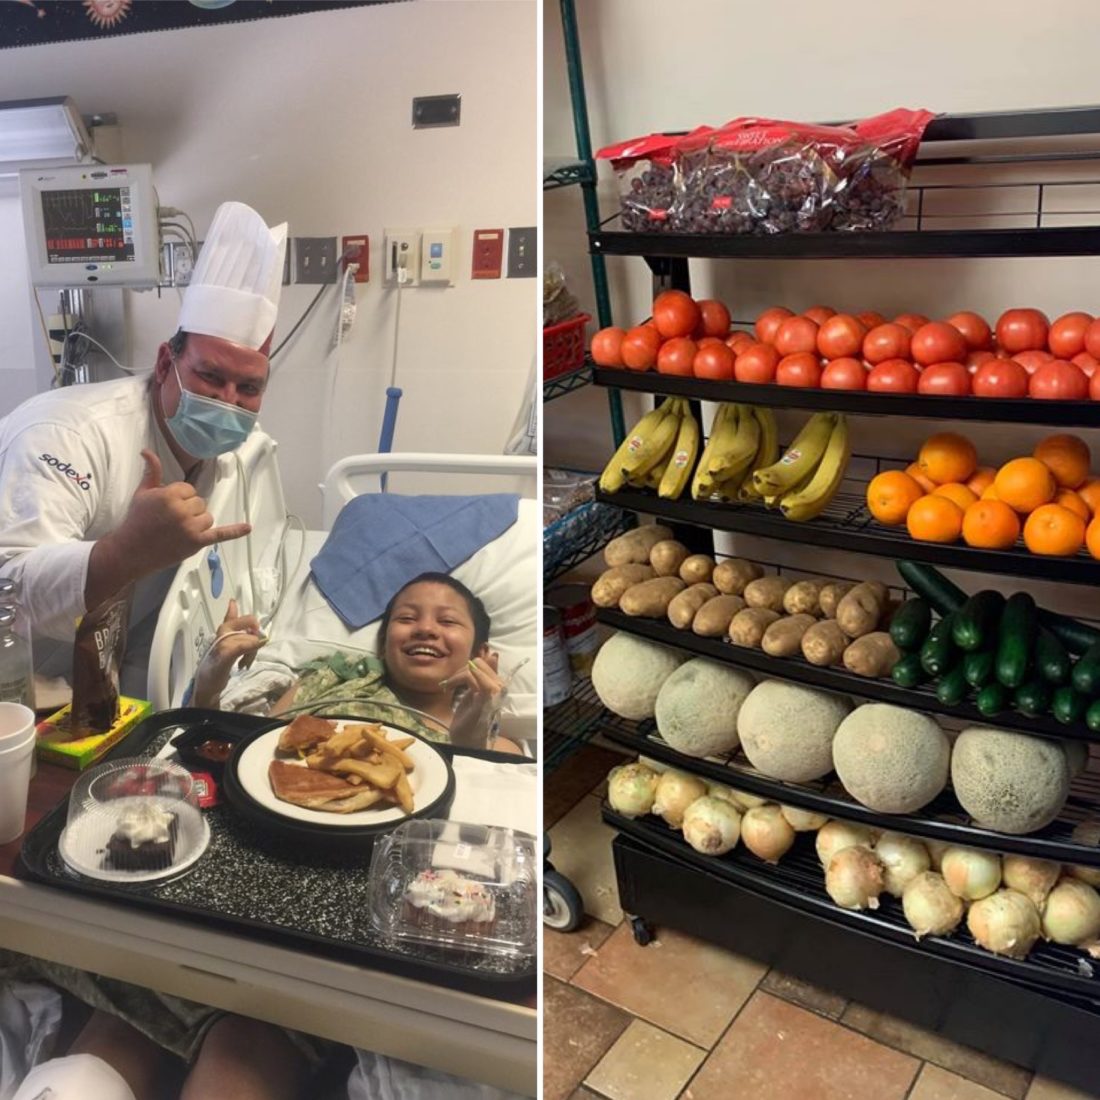 On left, chef with pediatric patient, and on right, shelves with fruits and vegetables. 